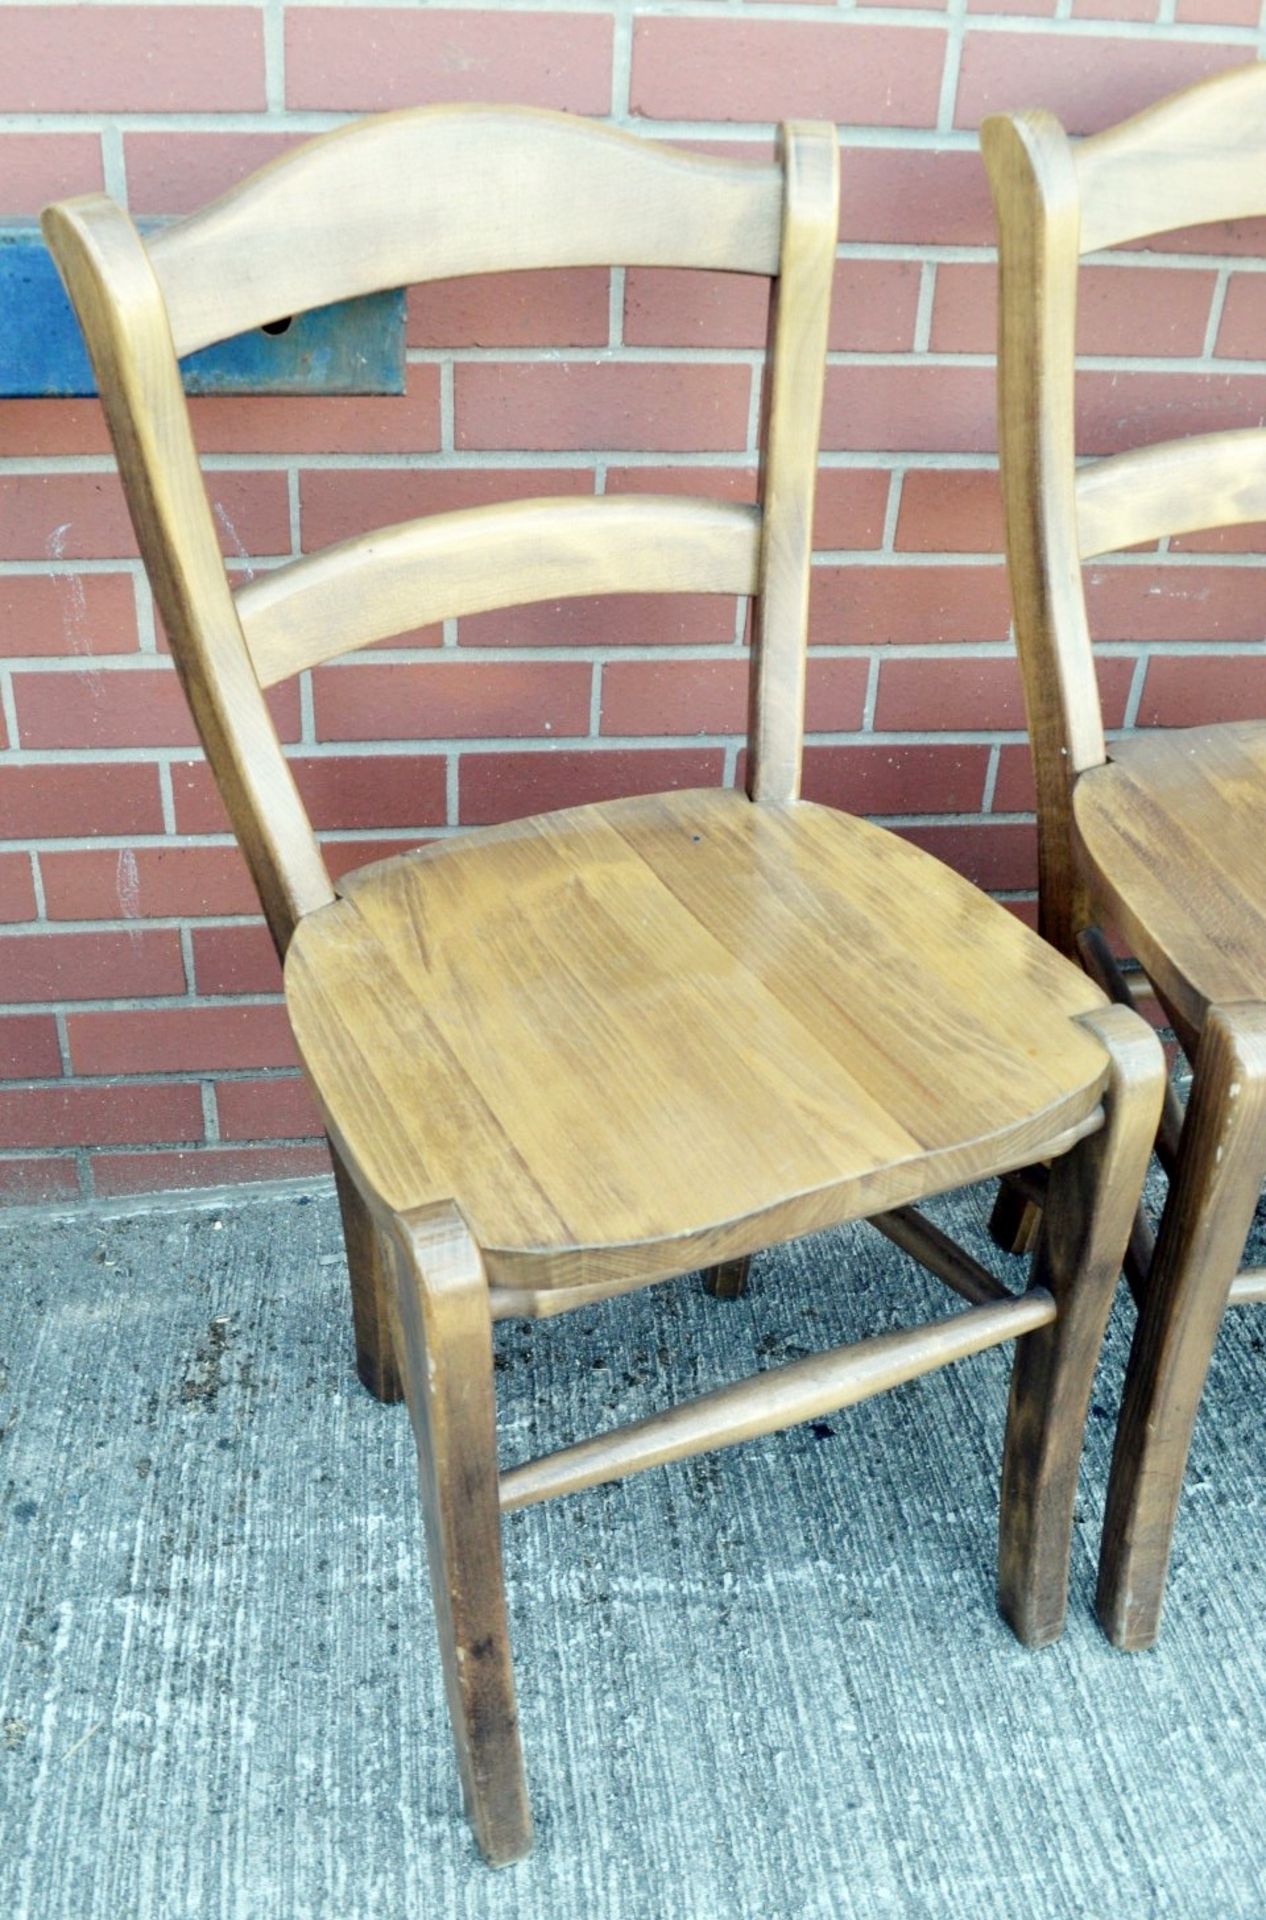 3 x Matching Sturdy Solid Wood Chairs With An Attractive Varnished Finish - Dimensions: H90 x W47 - Image 3 of 7